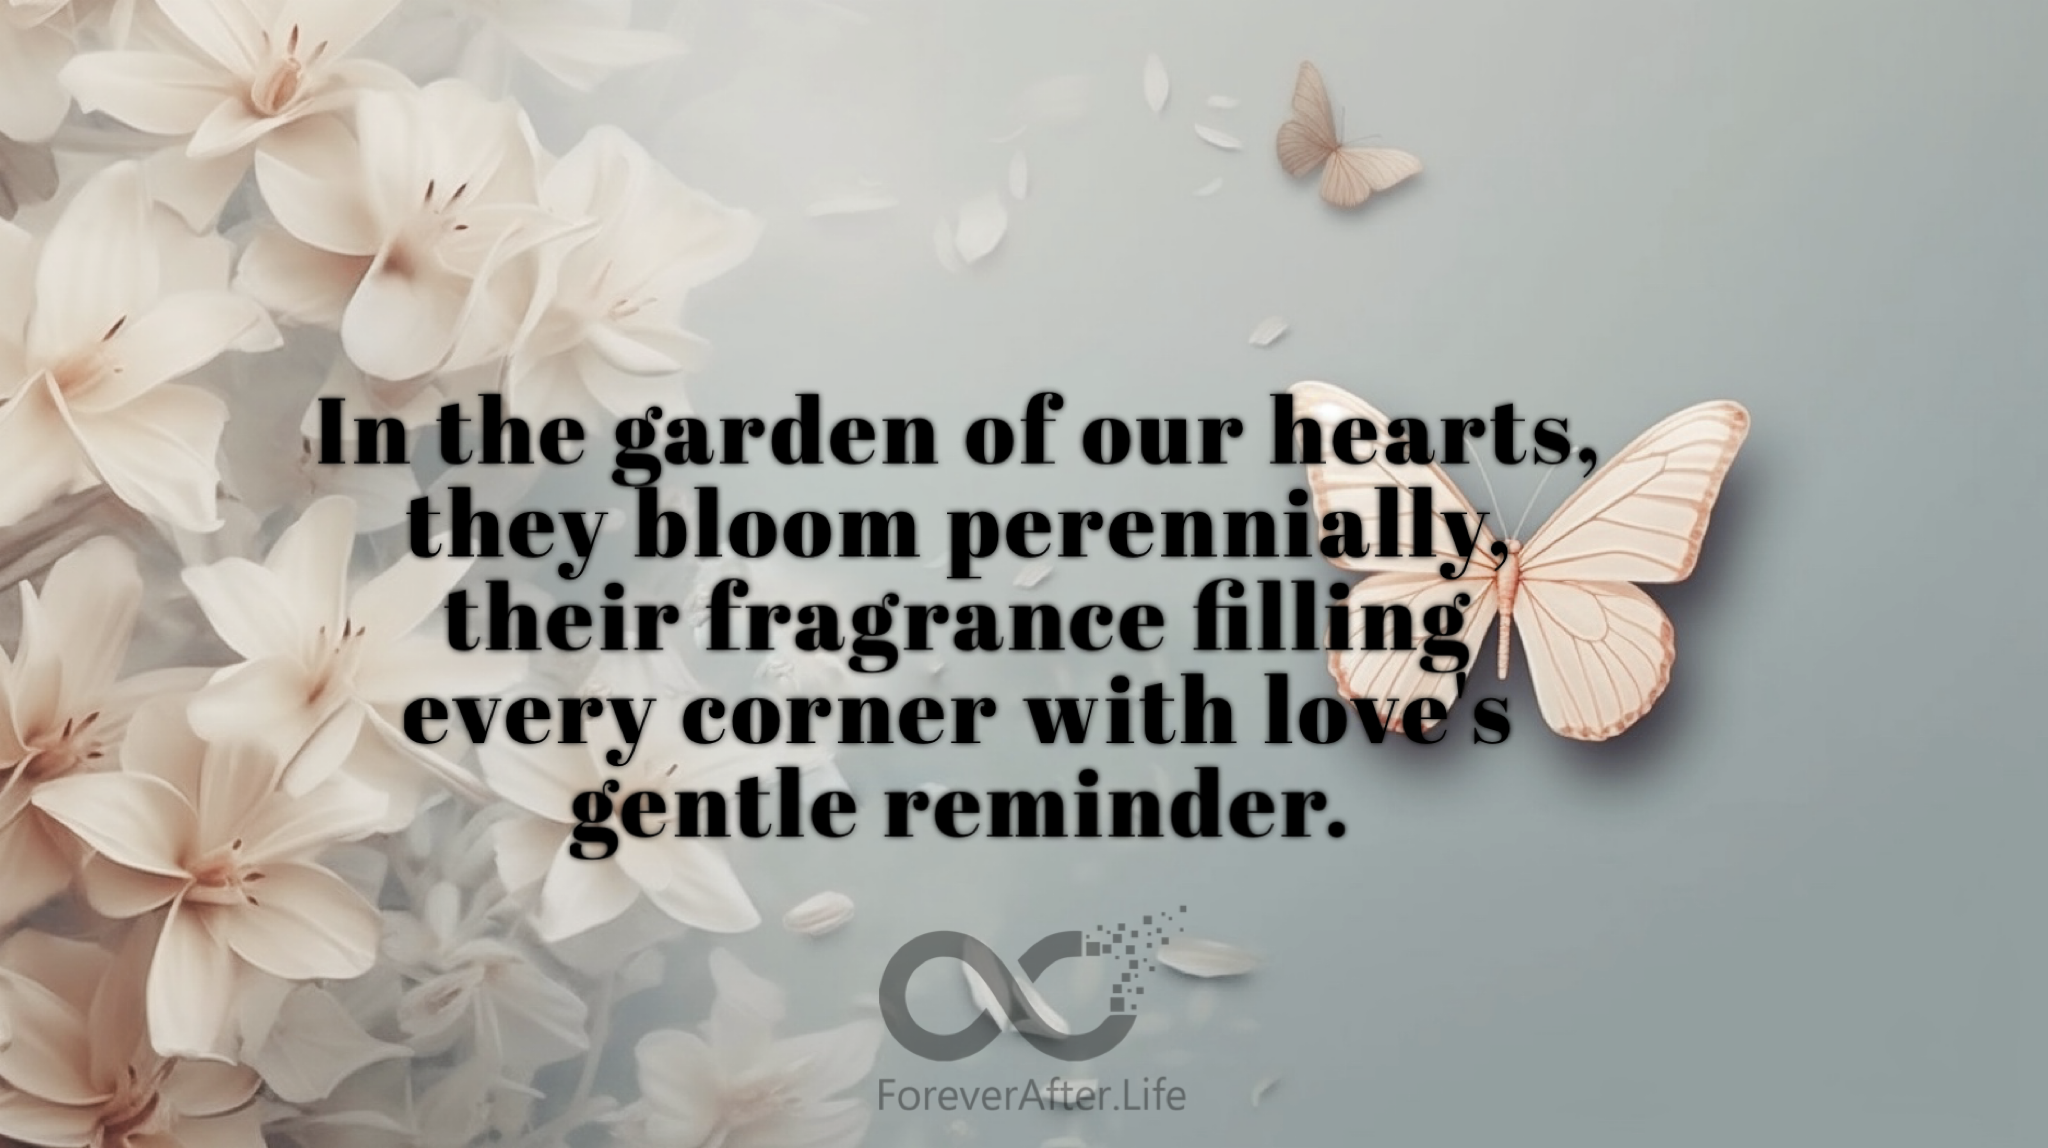 In the garden of our hearts, they bloom perennially, their fragrance filling every corner with love's gentle reminder.